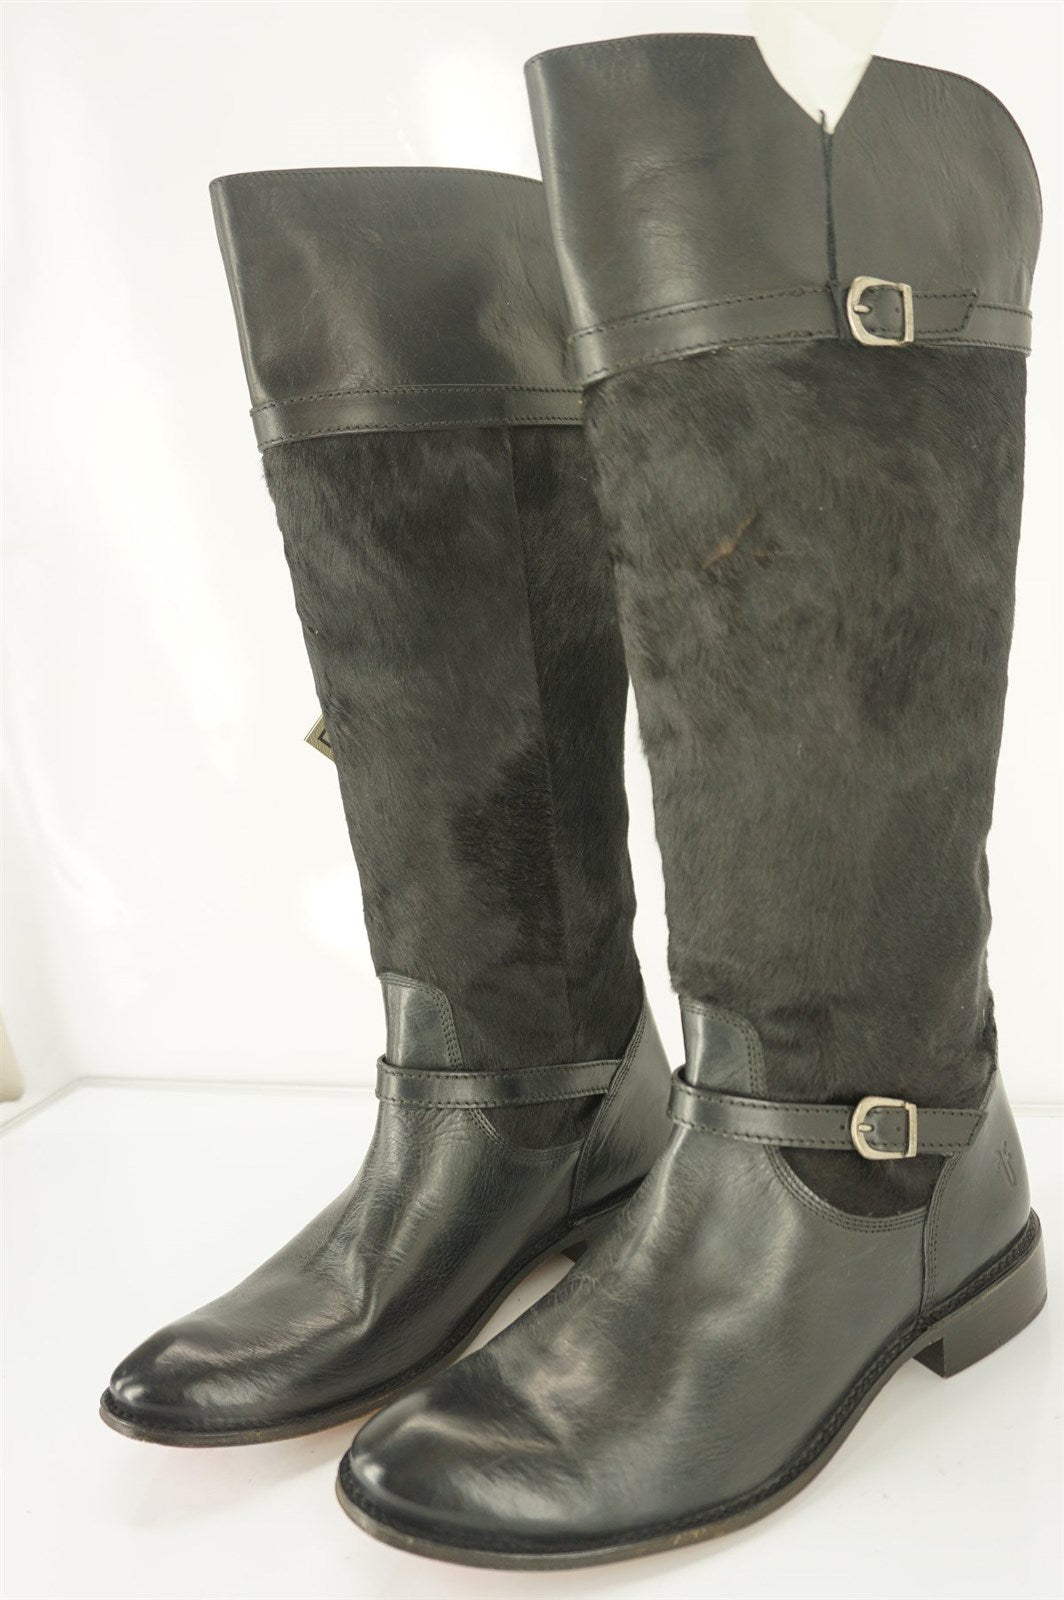 Frye Shirley Black Pony Hair Riding boots Size 9.5 New Tall cowboy Leather $648